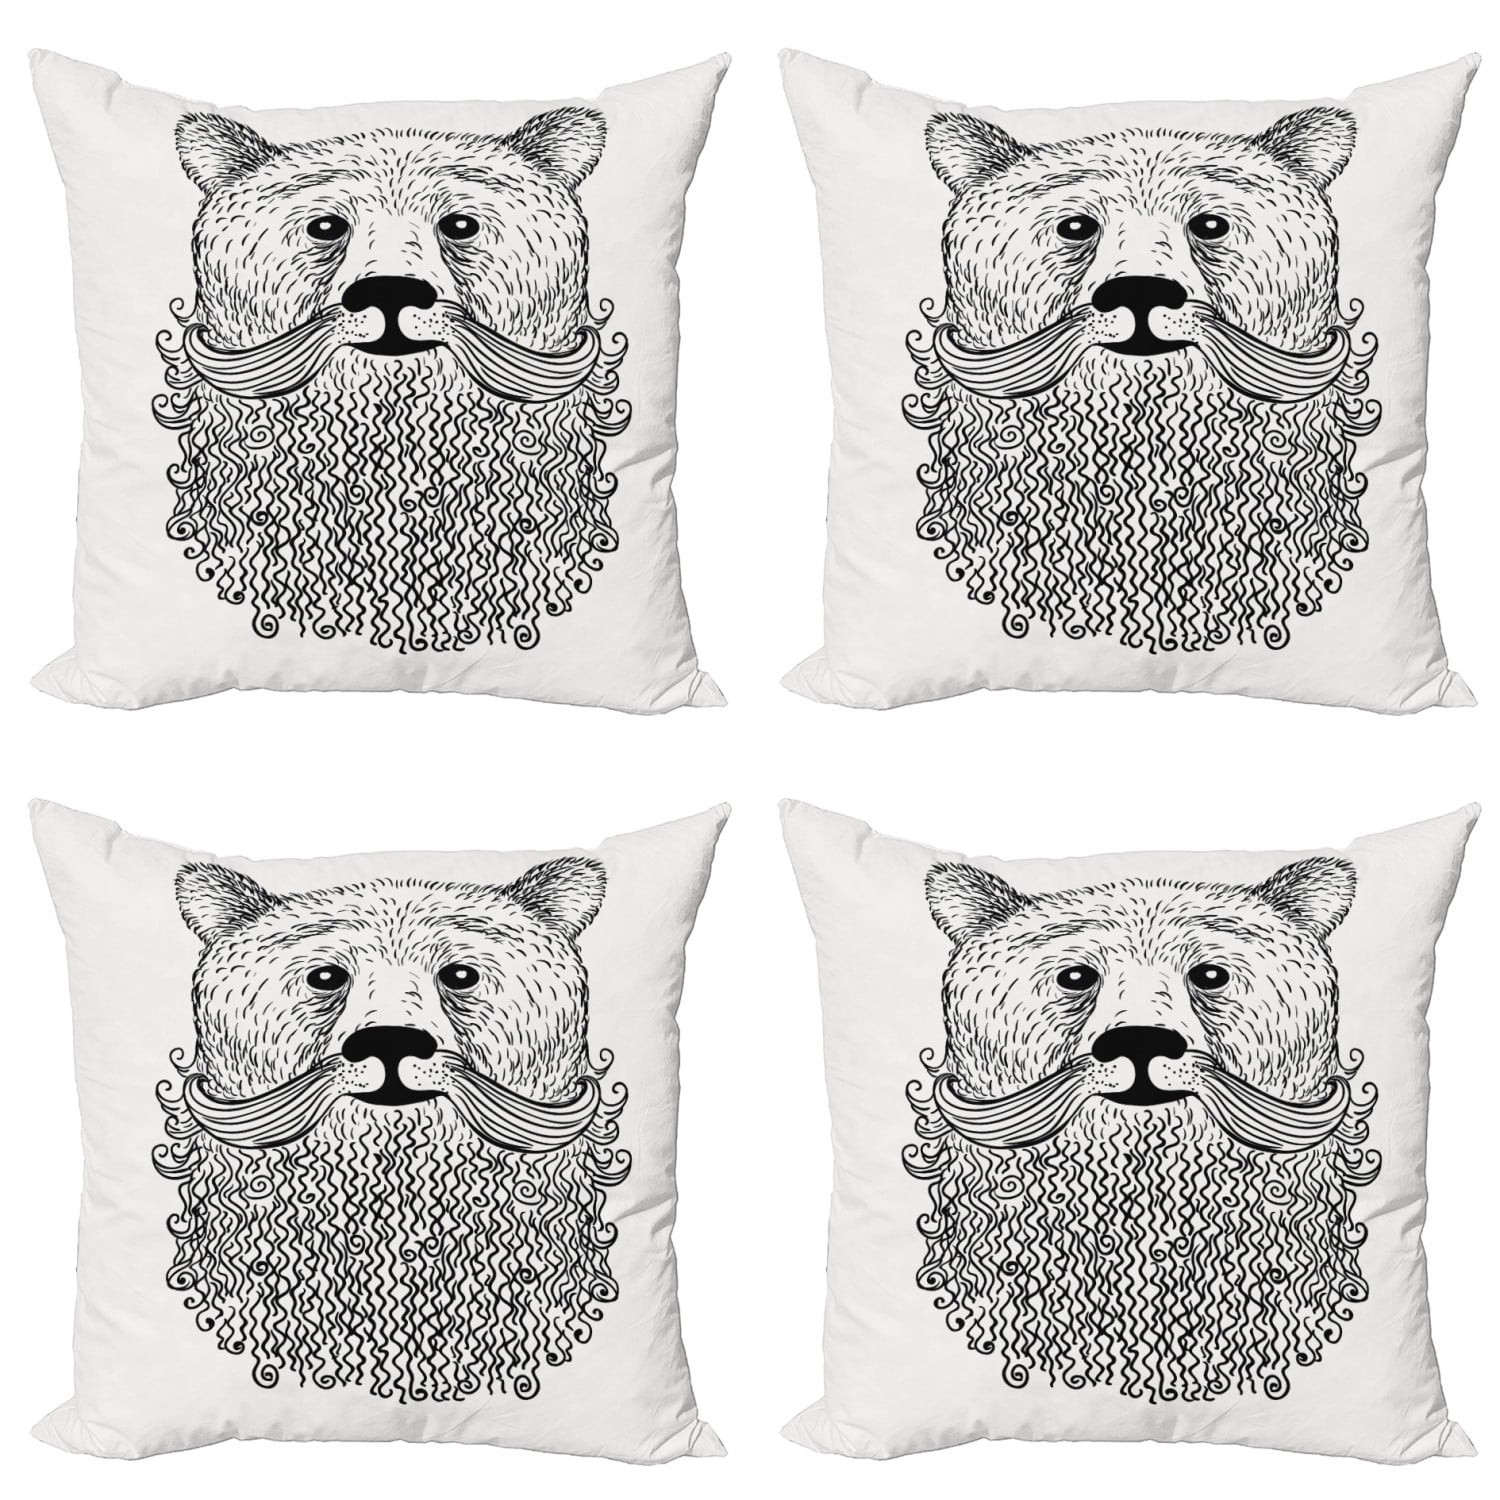 Multicolor Hipsterness Grungy Skull-Beard Lover Gift Throw Pillow 16x16 